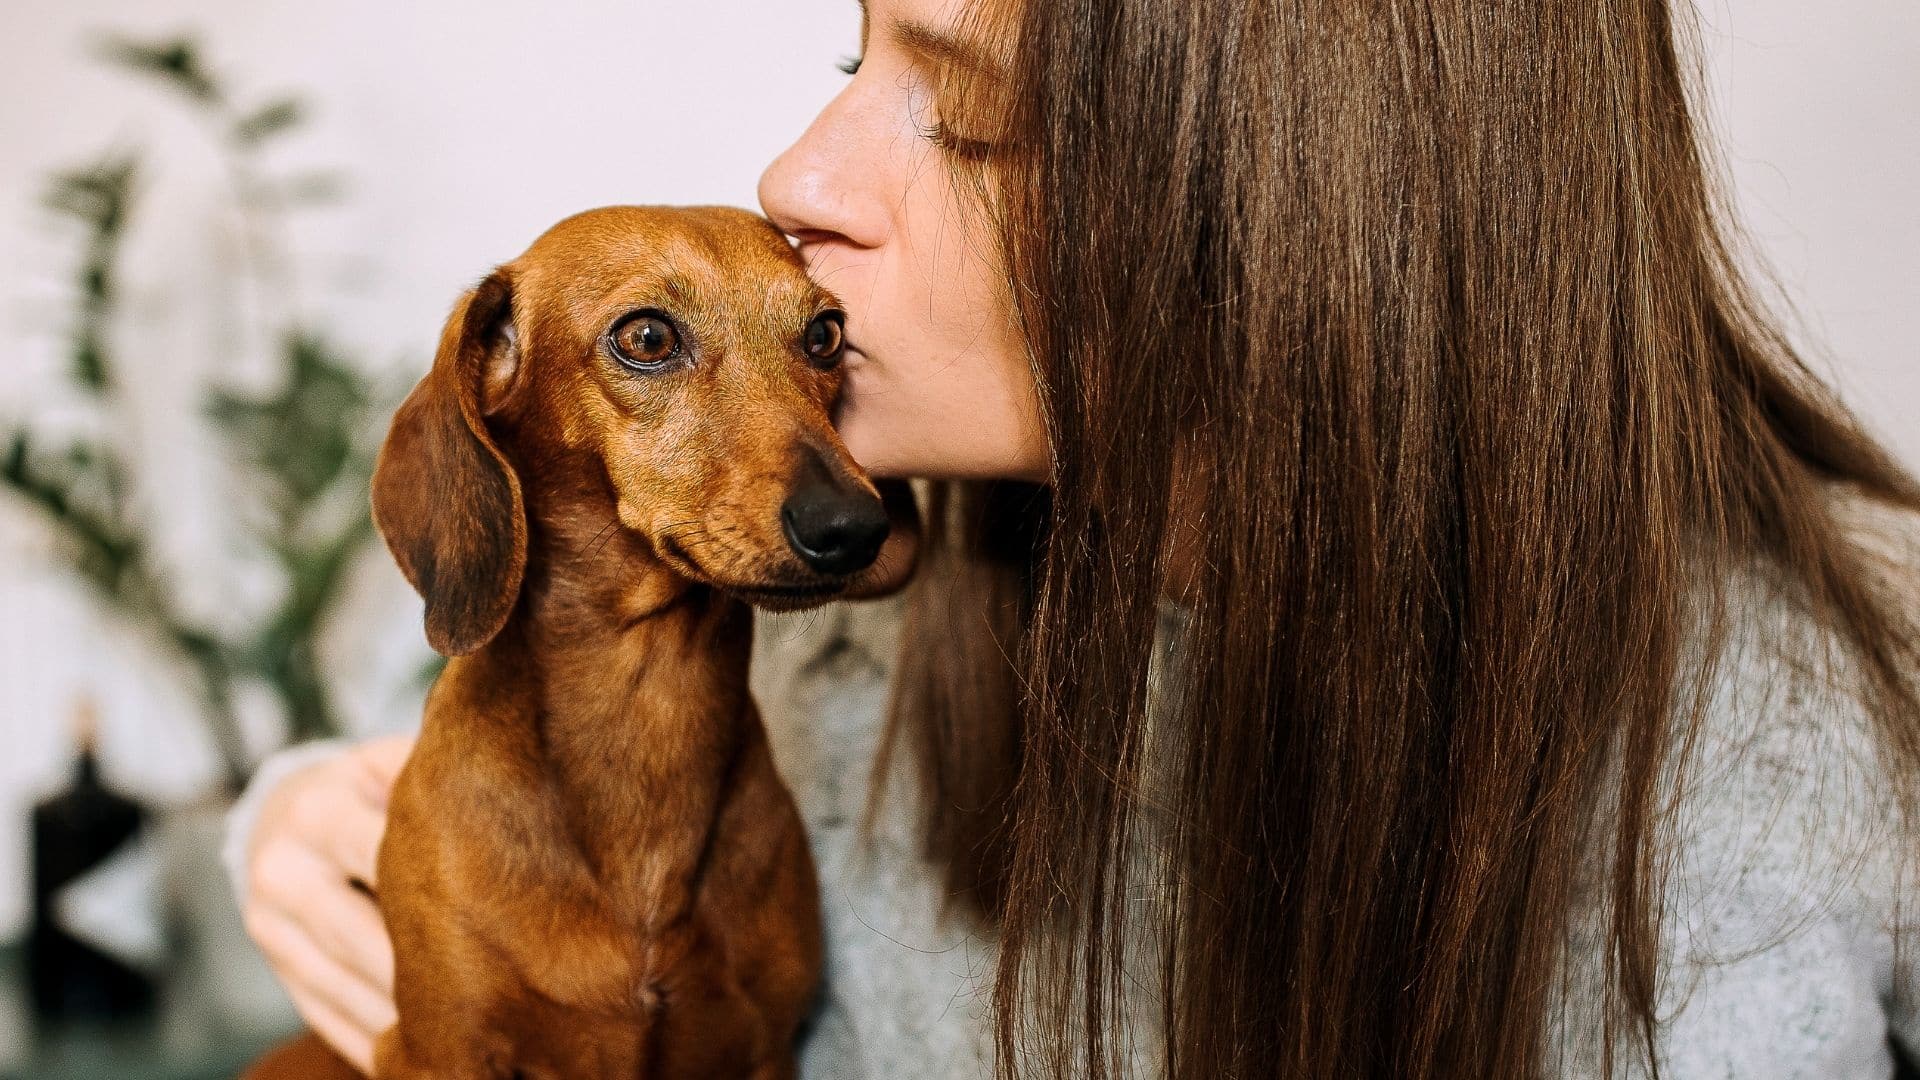 5 Ways your Dog Shows they Love You